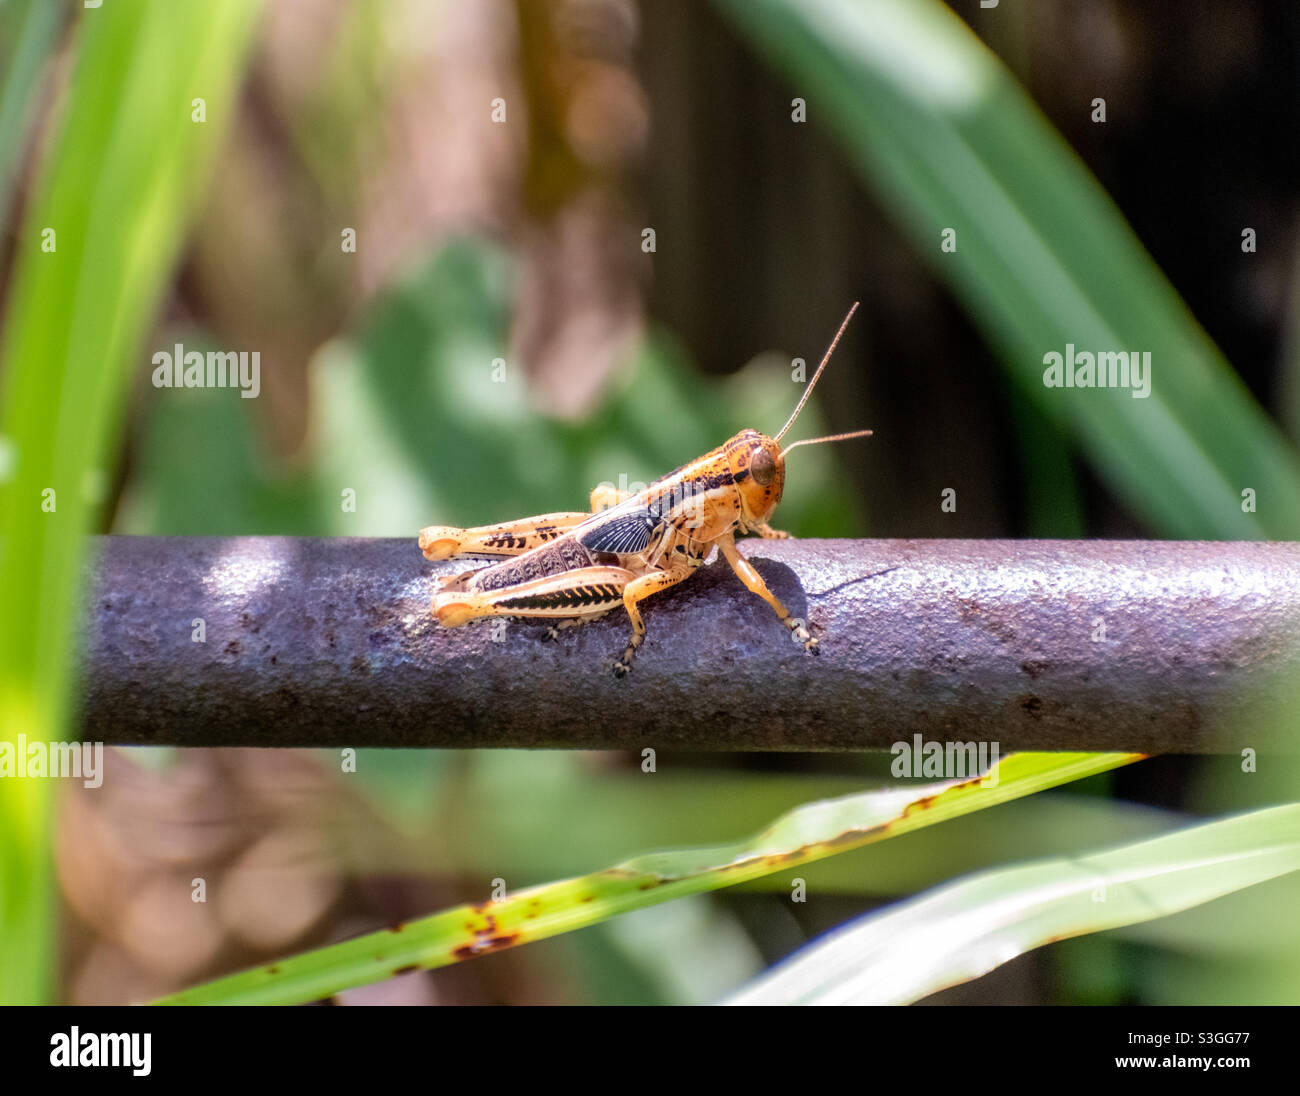 Single grasshopper resting on metal bar in the field. Stock Photo